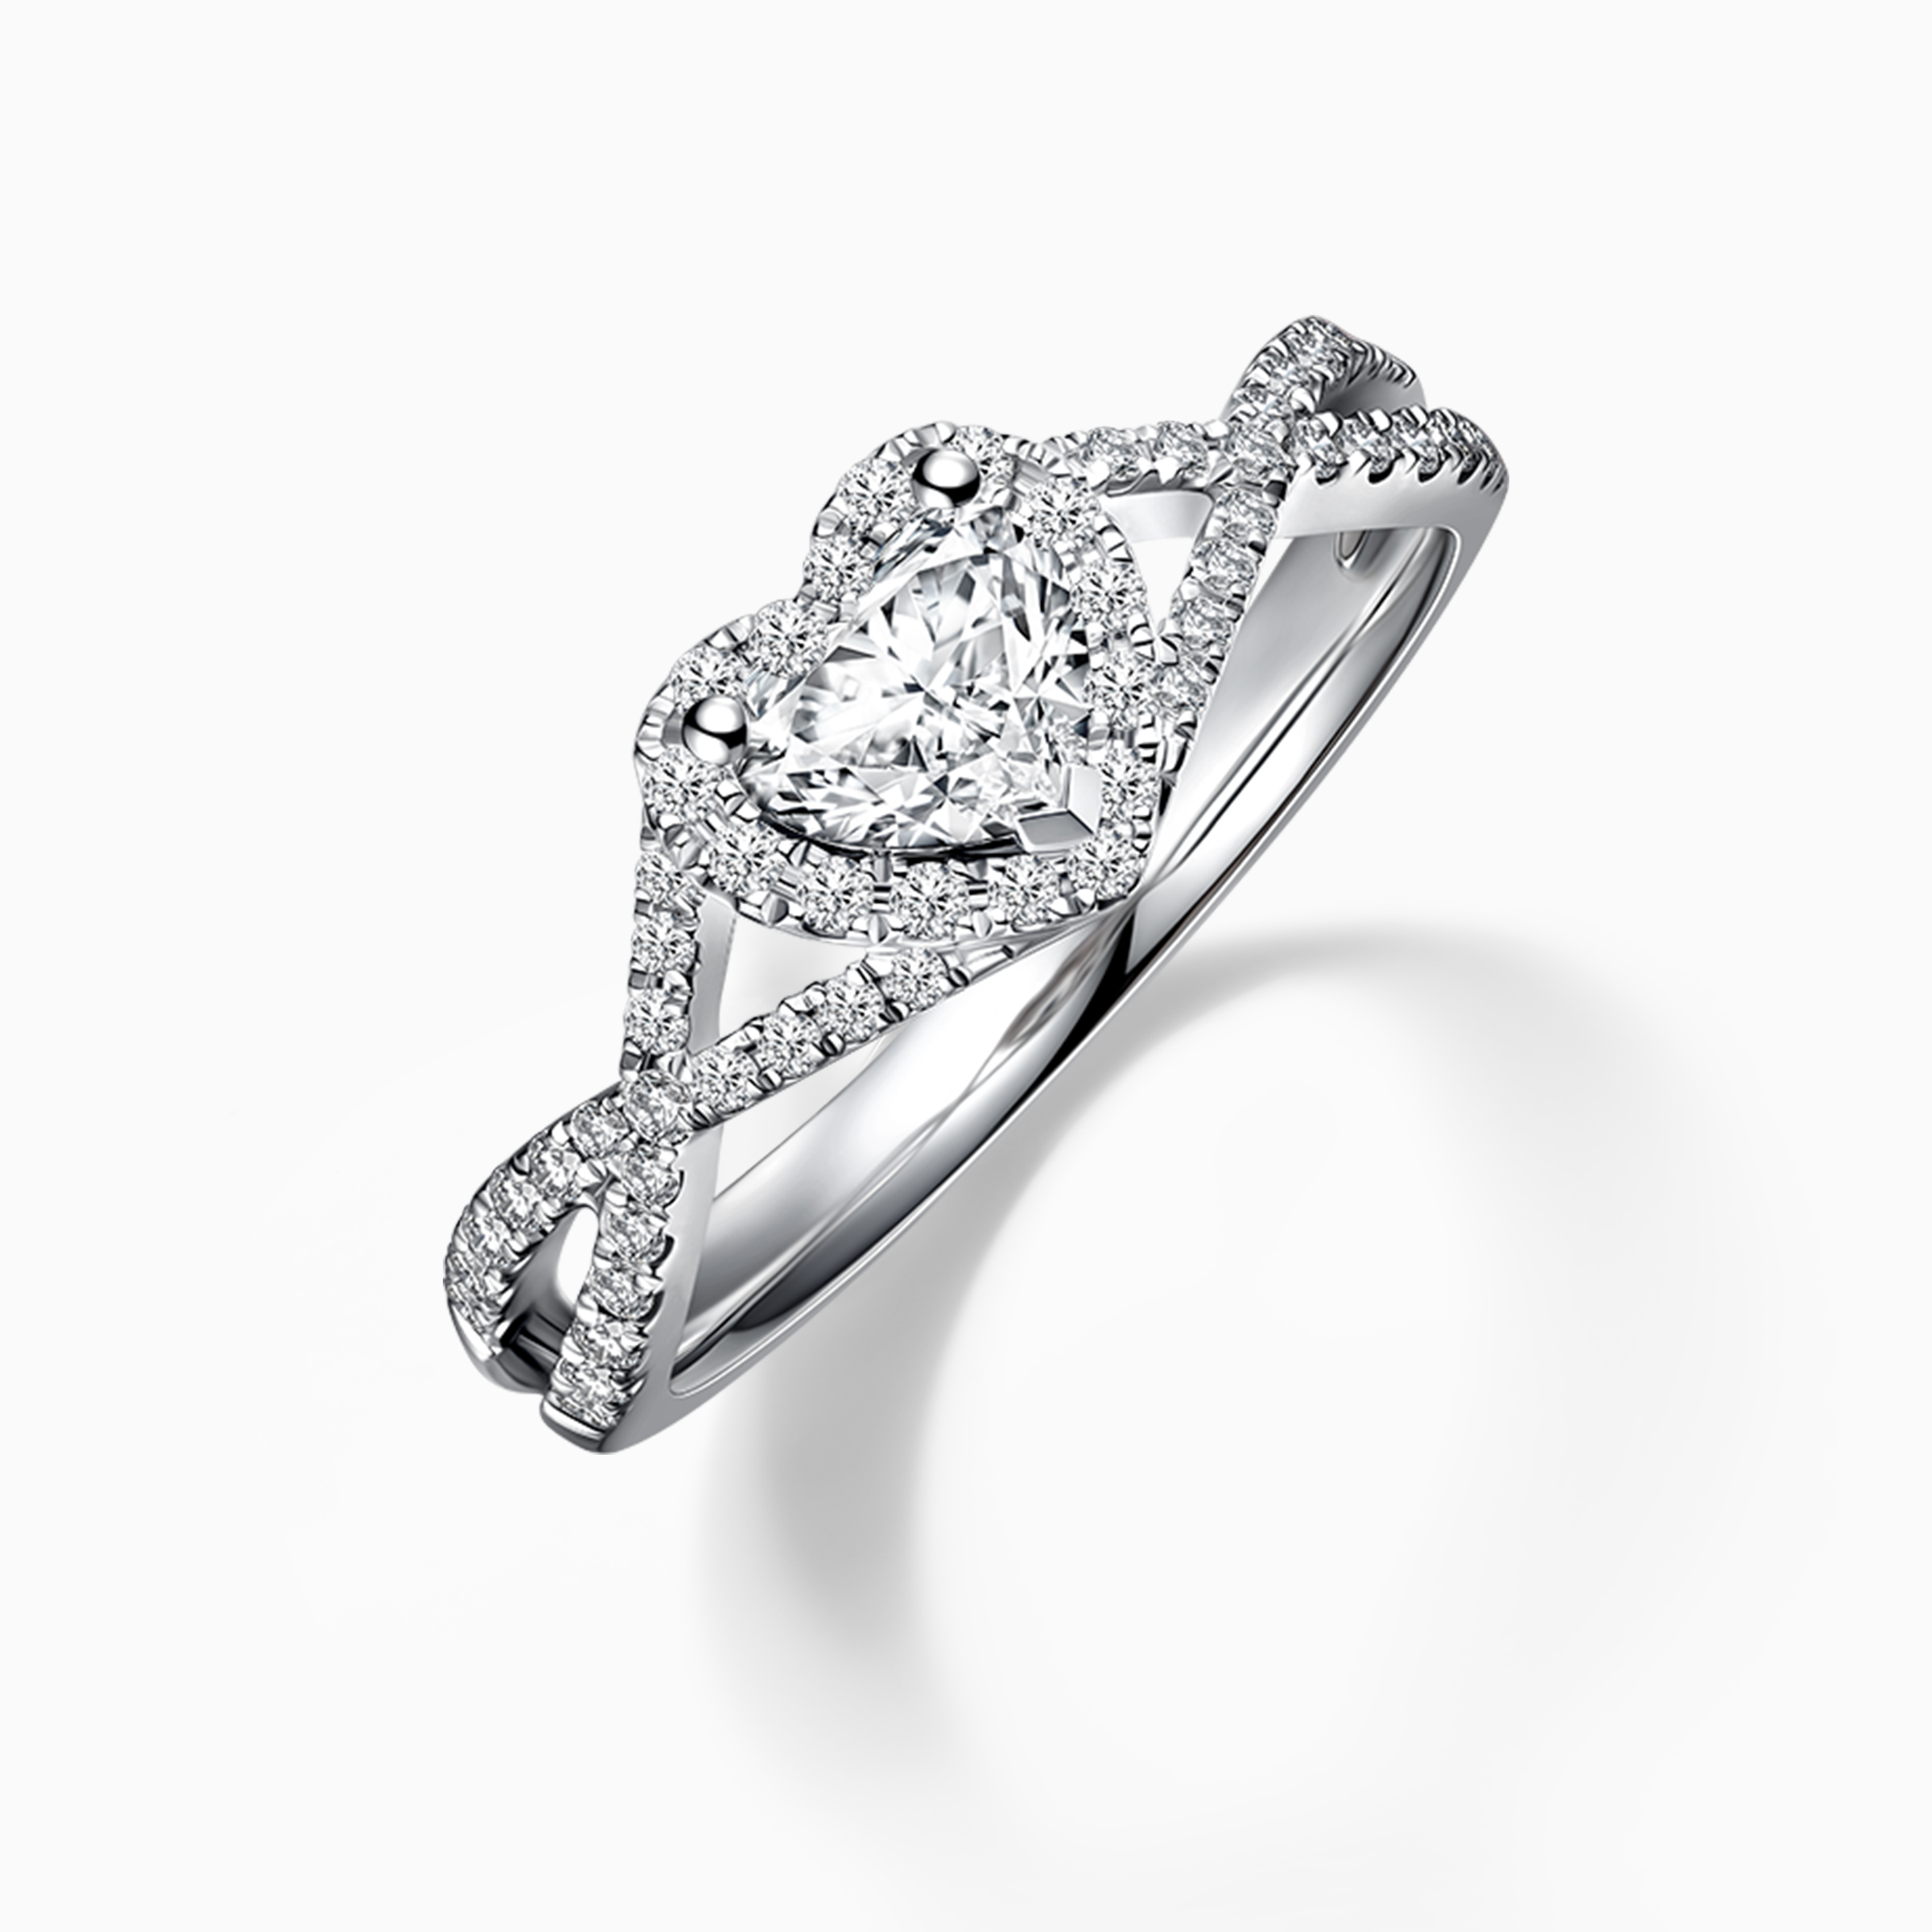 Darry Ring halo diamond engagement ring top view